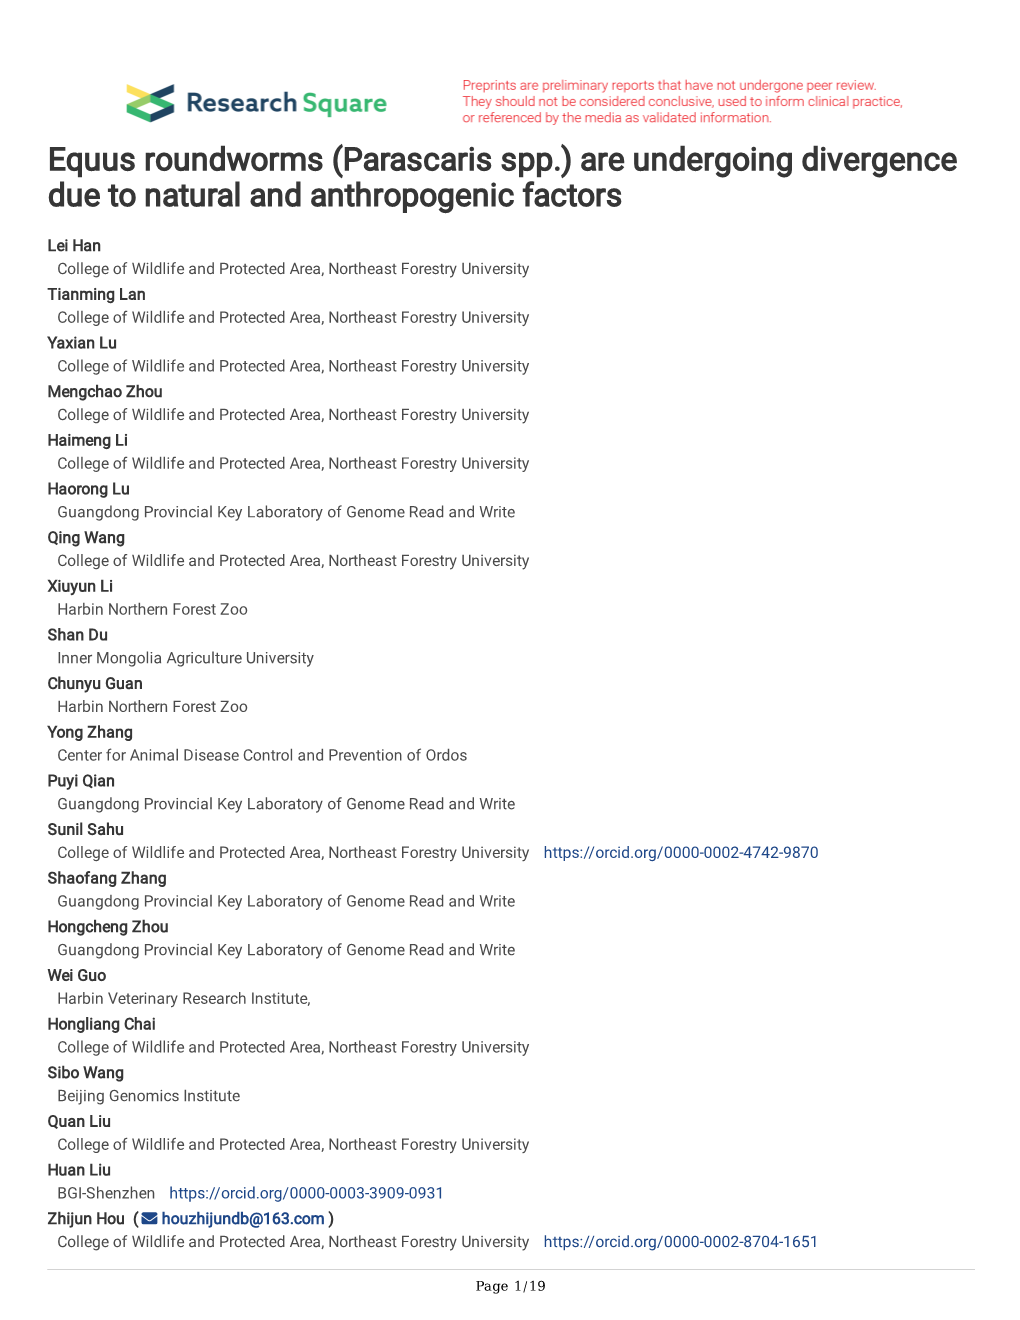 Parascaris Spp.) Are Undergoing Divergence Due to Natural and Anthropogenic Factors